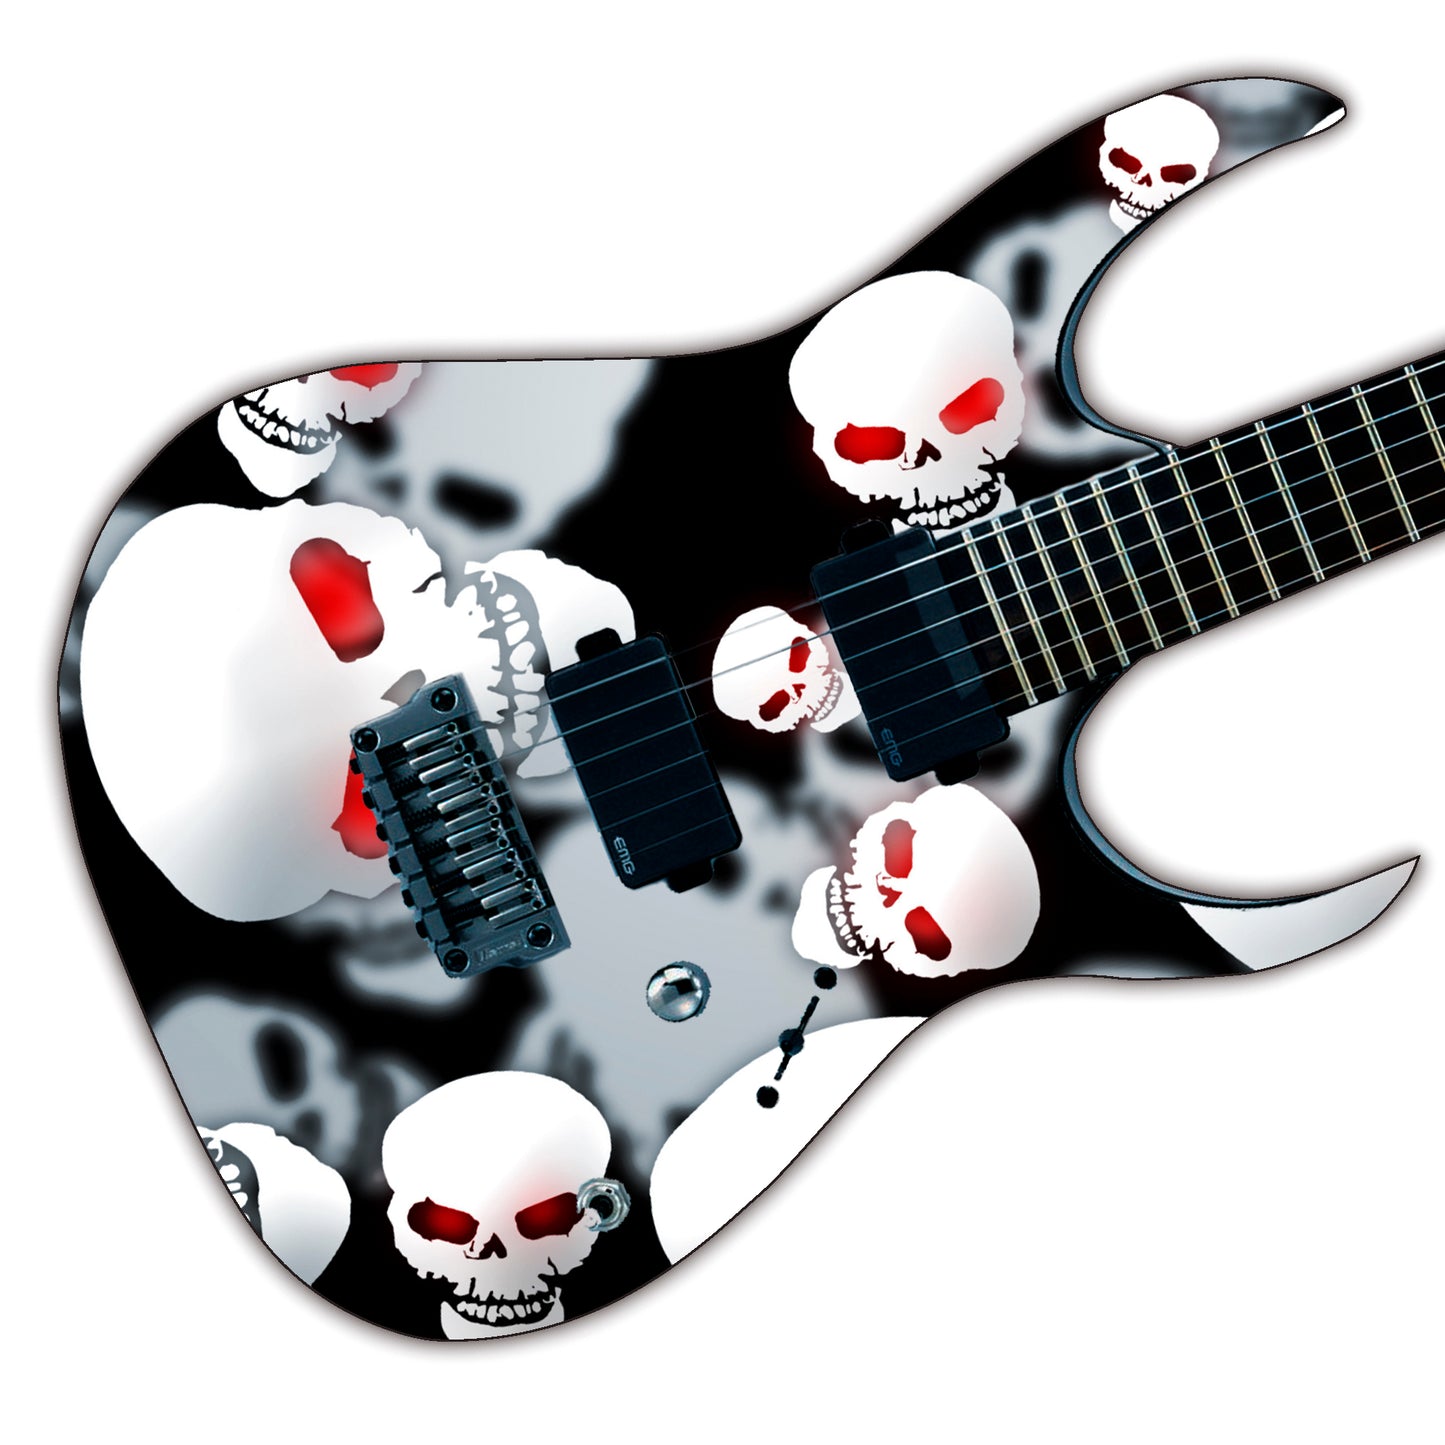 Guitar, Bass or Acoustic Skin Wrap Laminated Vinyl Decal Sticker The Red Eye GS96